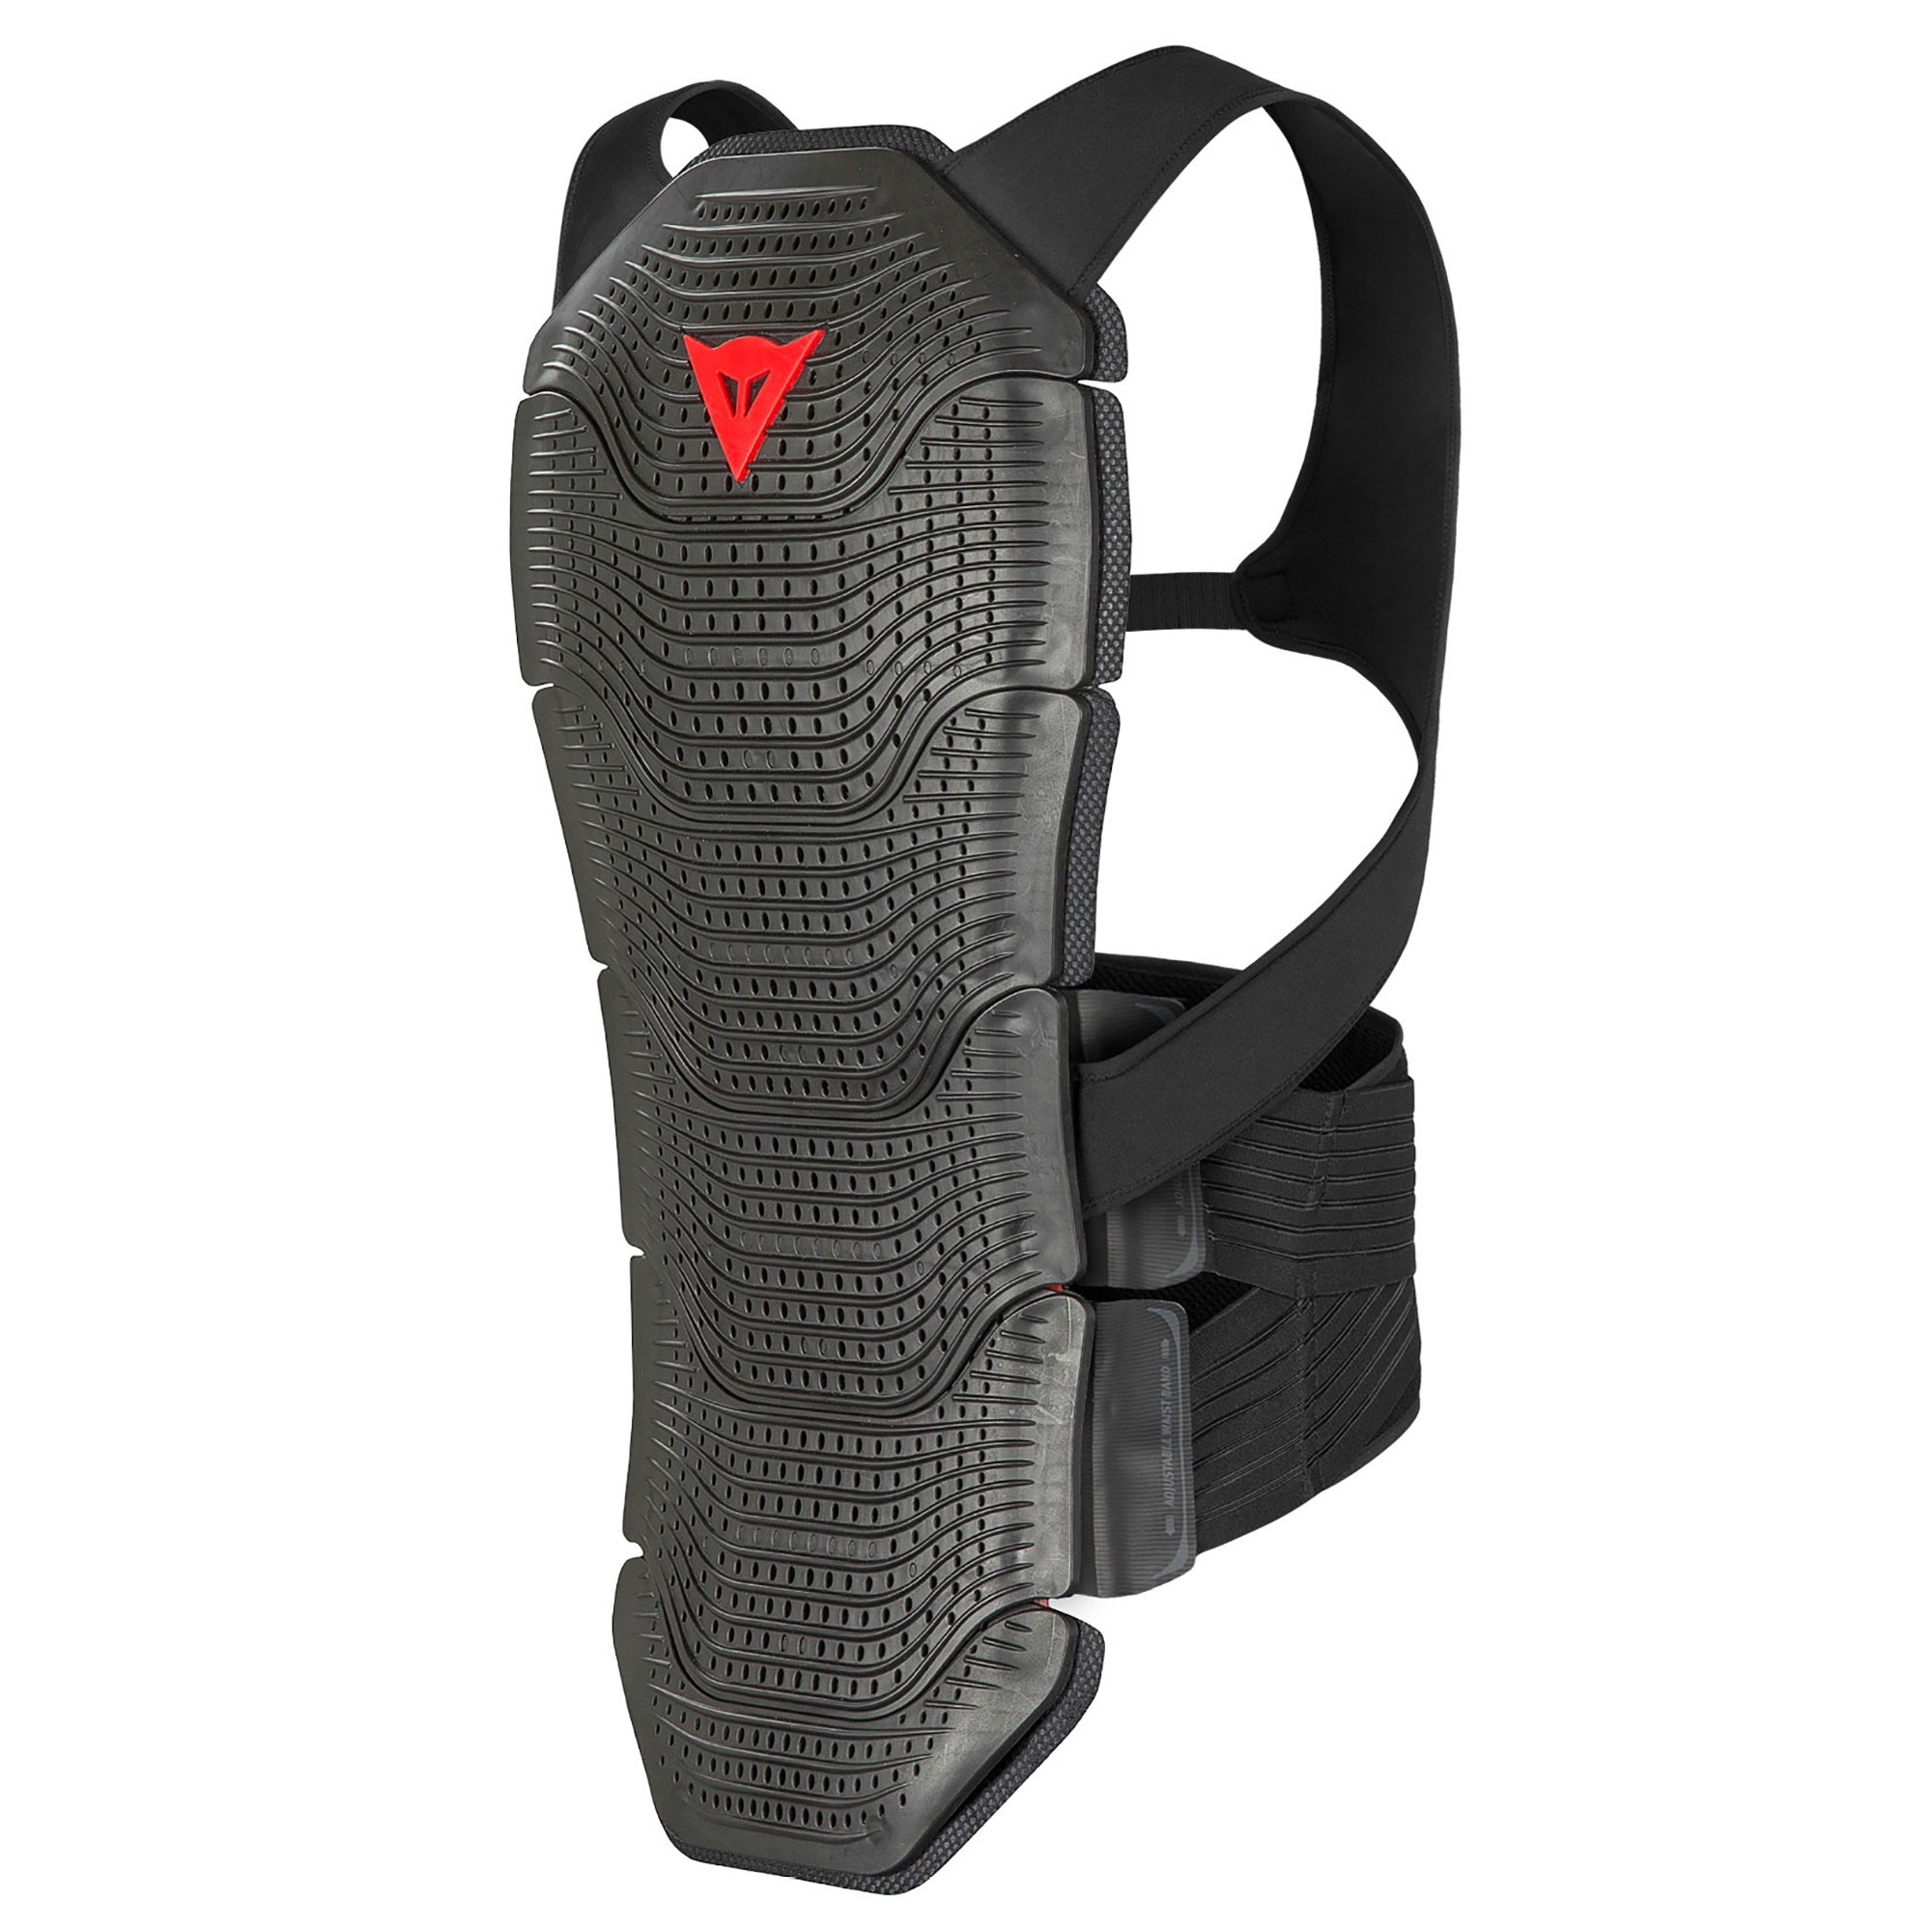 Dainese Manis D1 Motorcycle/Bike Riding Back Protector/Protection